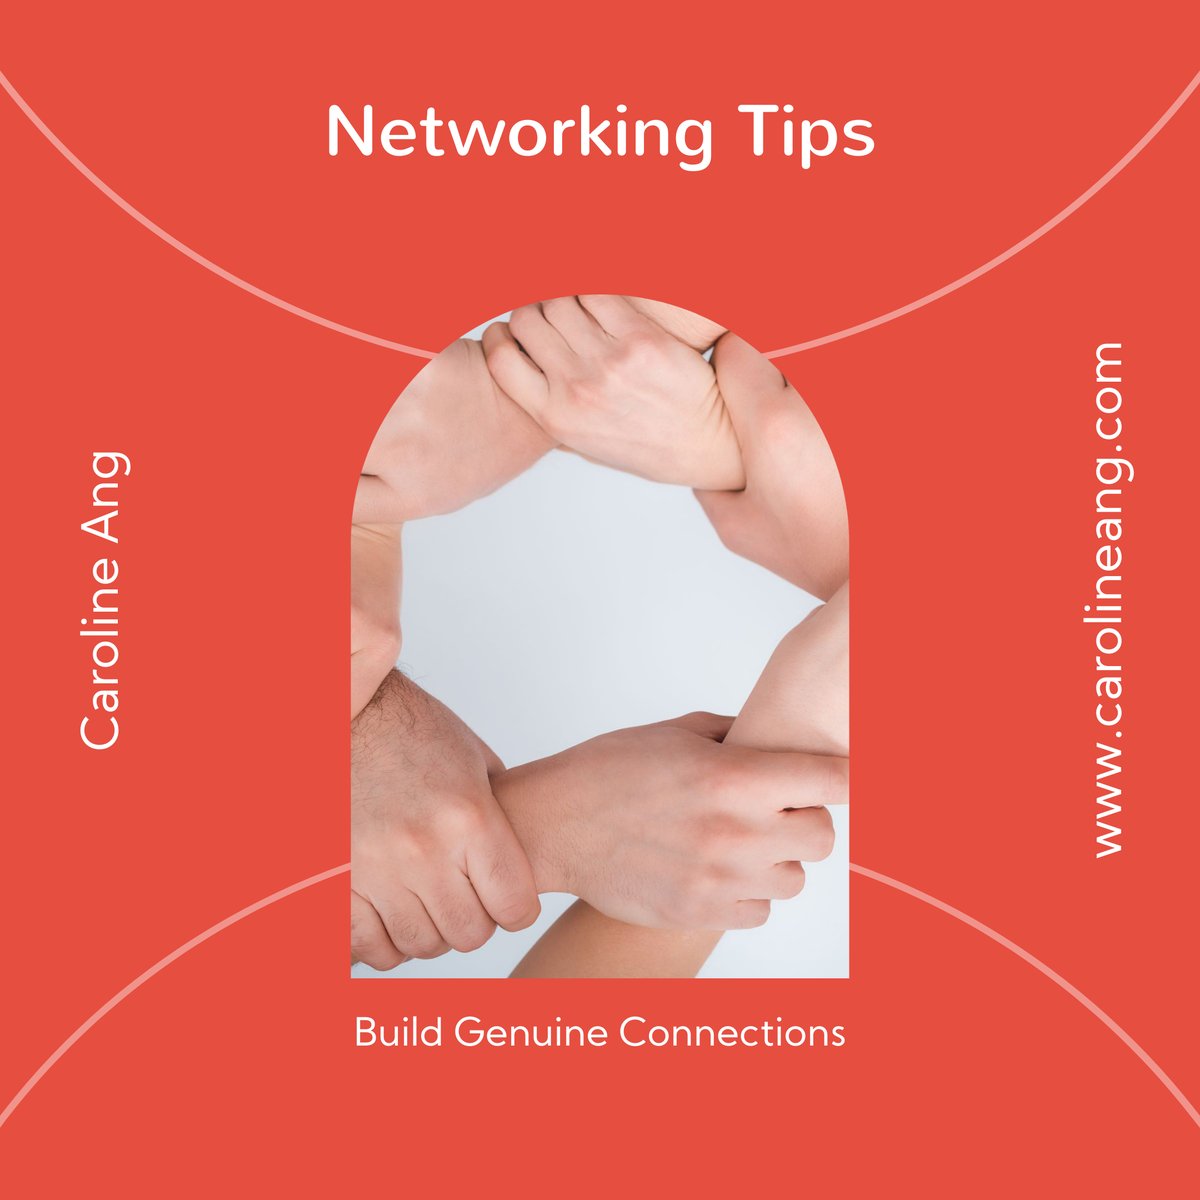 Networking is all about building genuine connections. Remember to be authentic, listen actively, and follow up with people. You never know where a new connection can take you! #networkingtips #professionalrelationships #CarolineAng